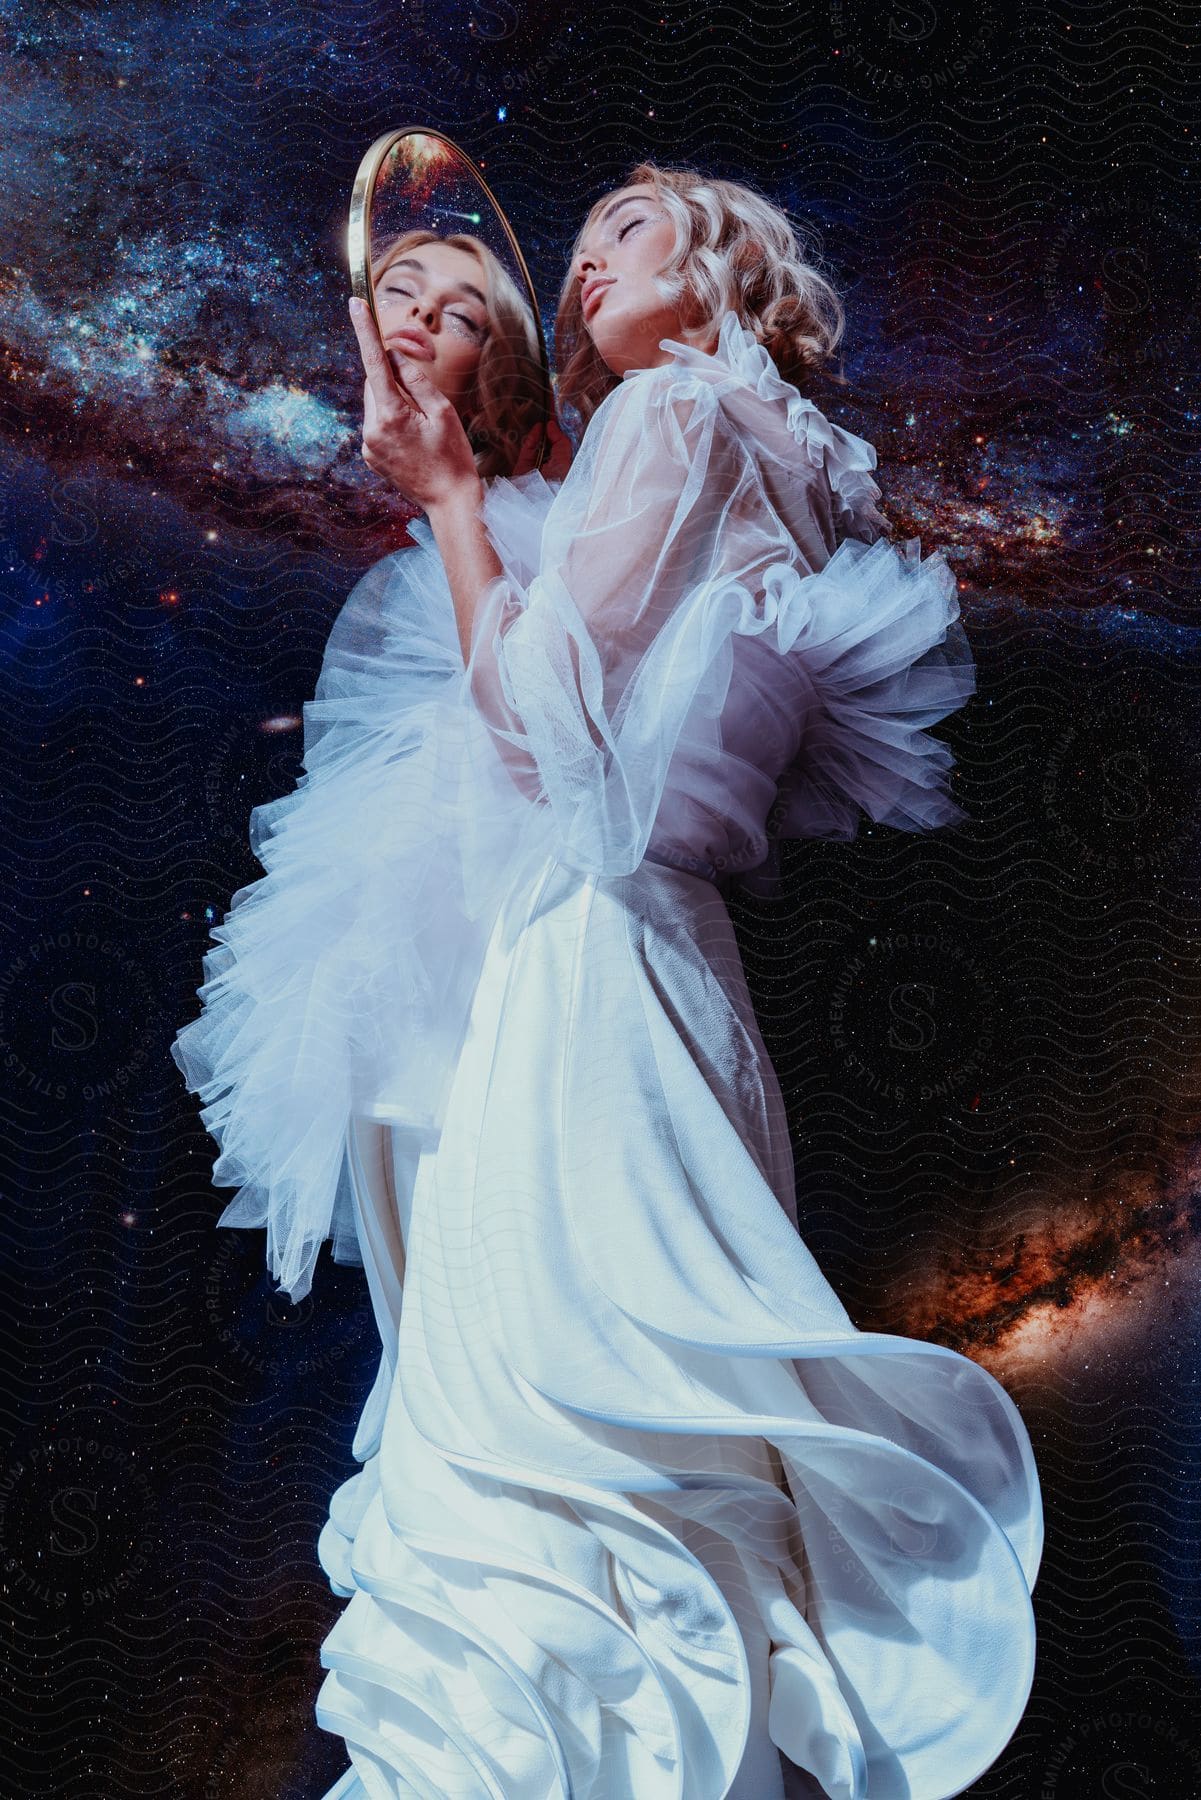 Woman wearing white dress holds mirror reflecting her face and the surrounding outer space.